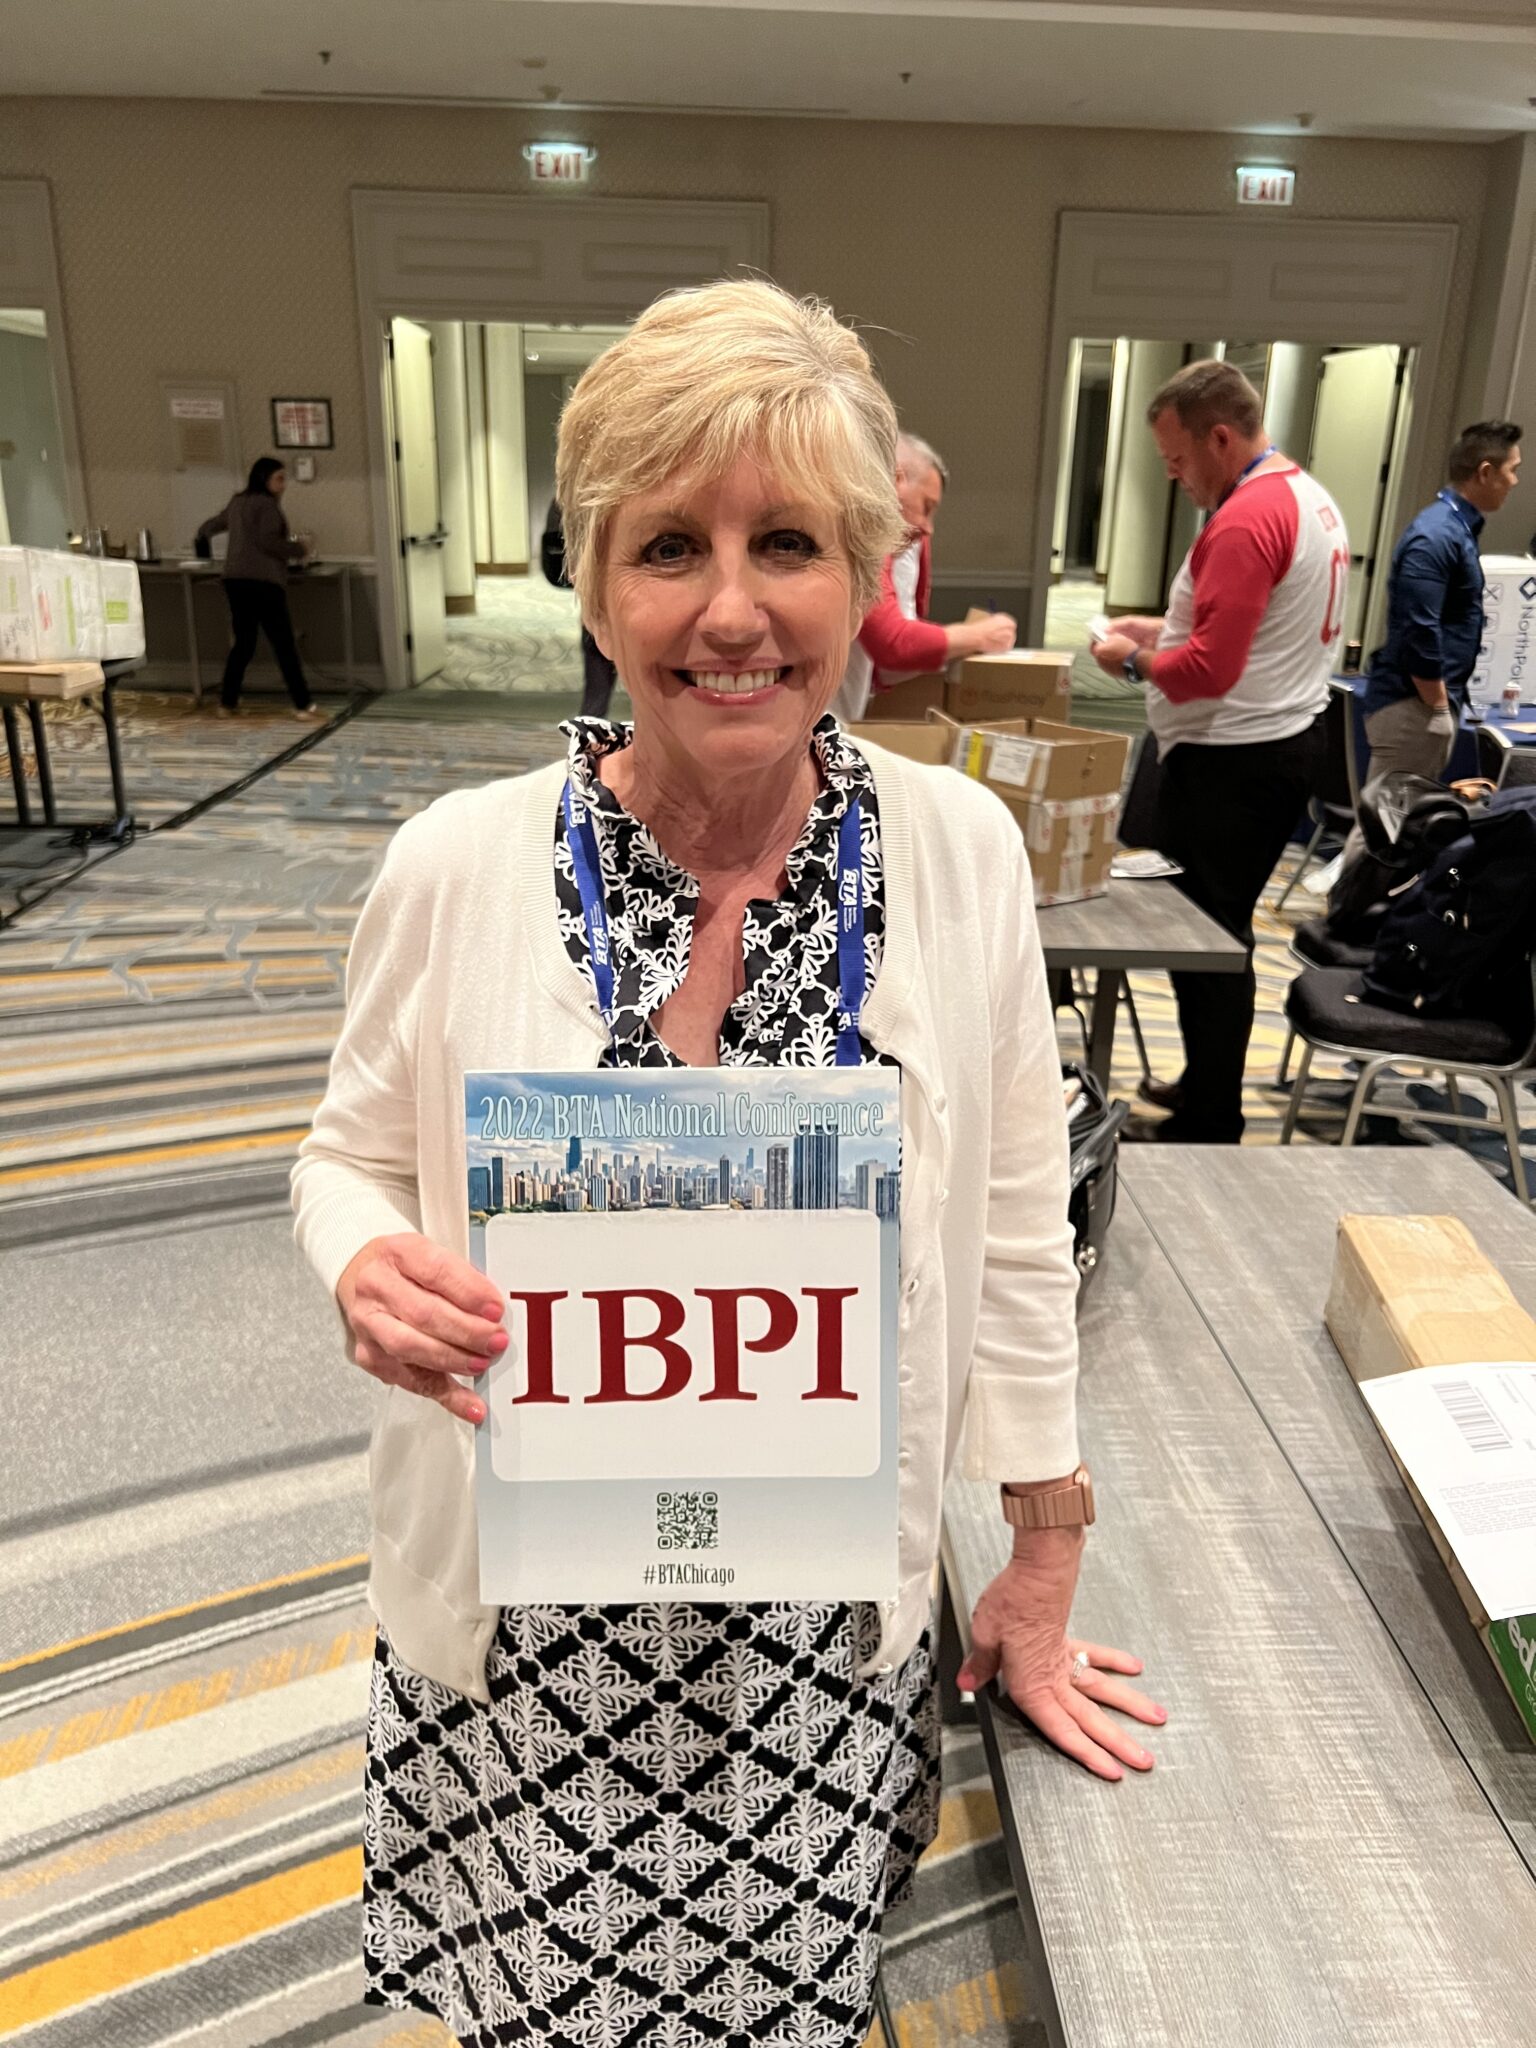 IBPI Recruiting Members at BTA National Conference Industry Analysts